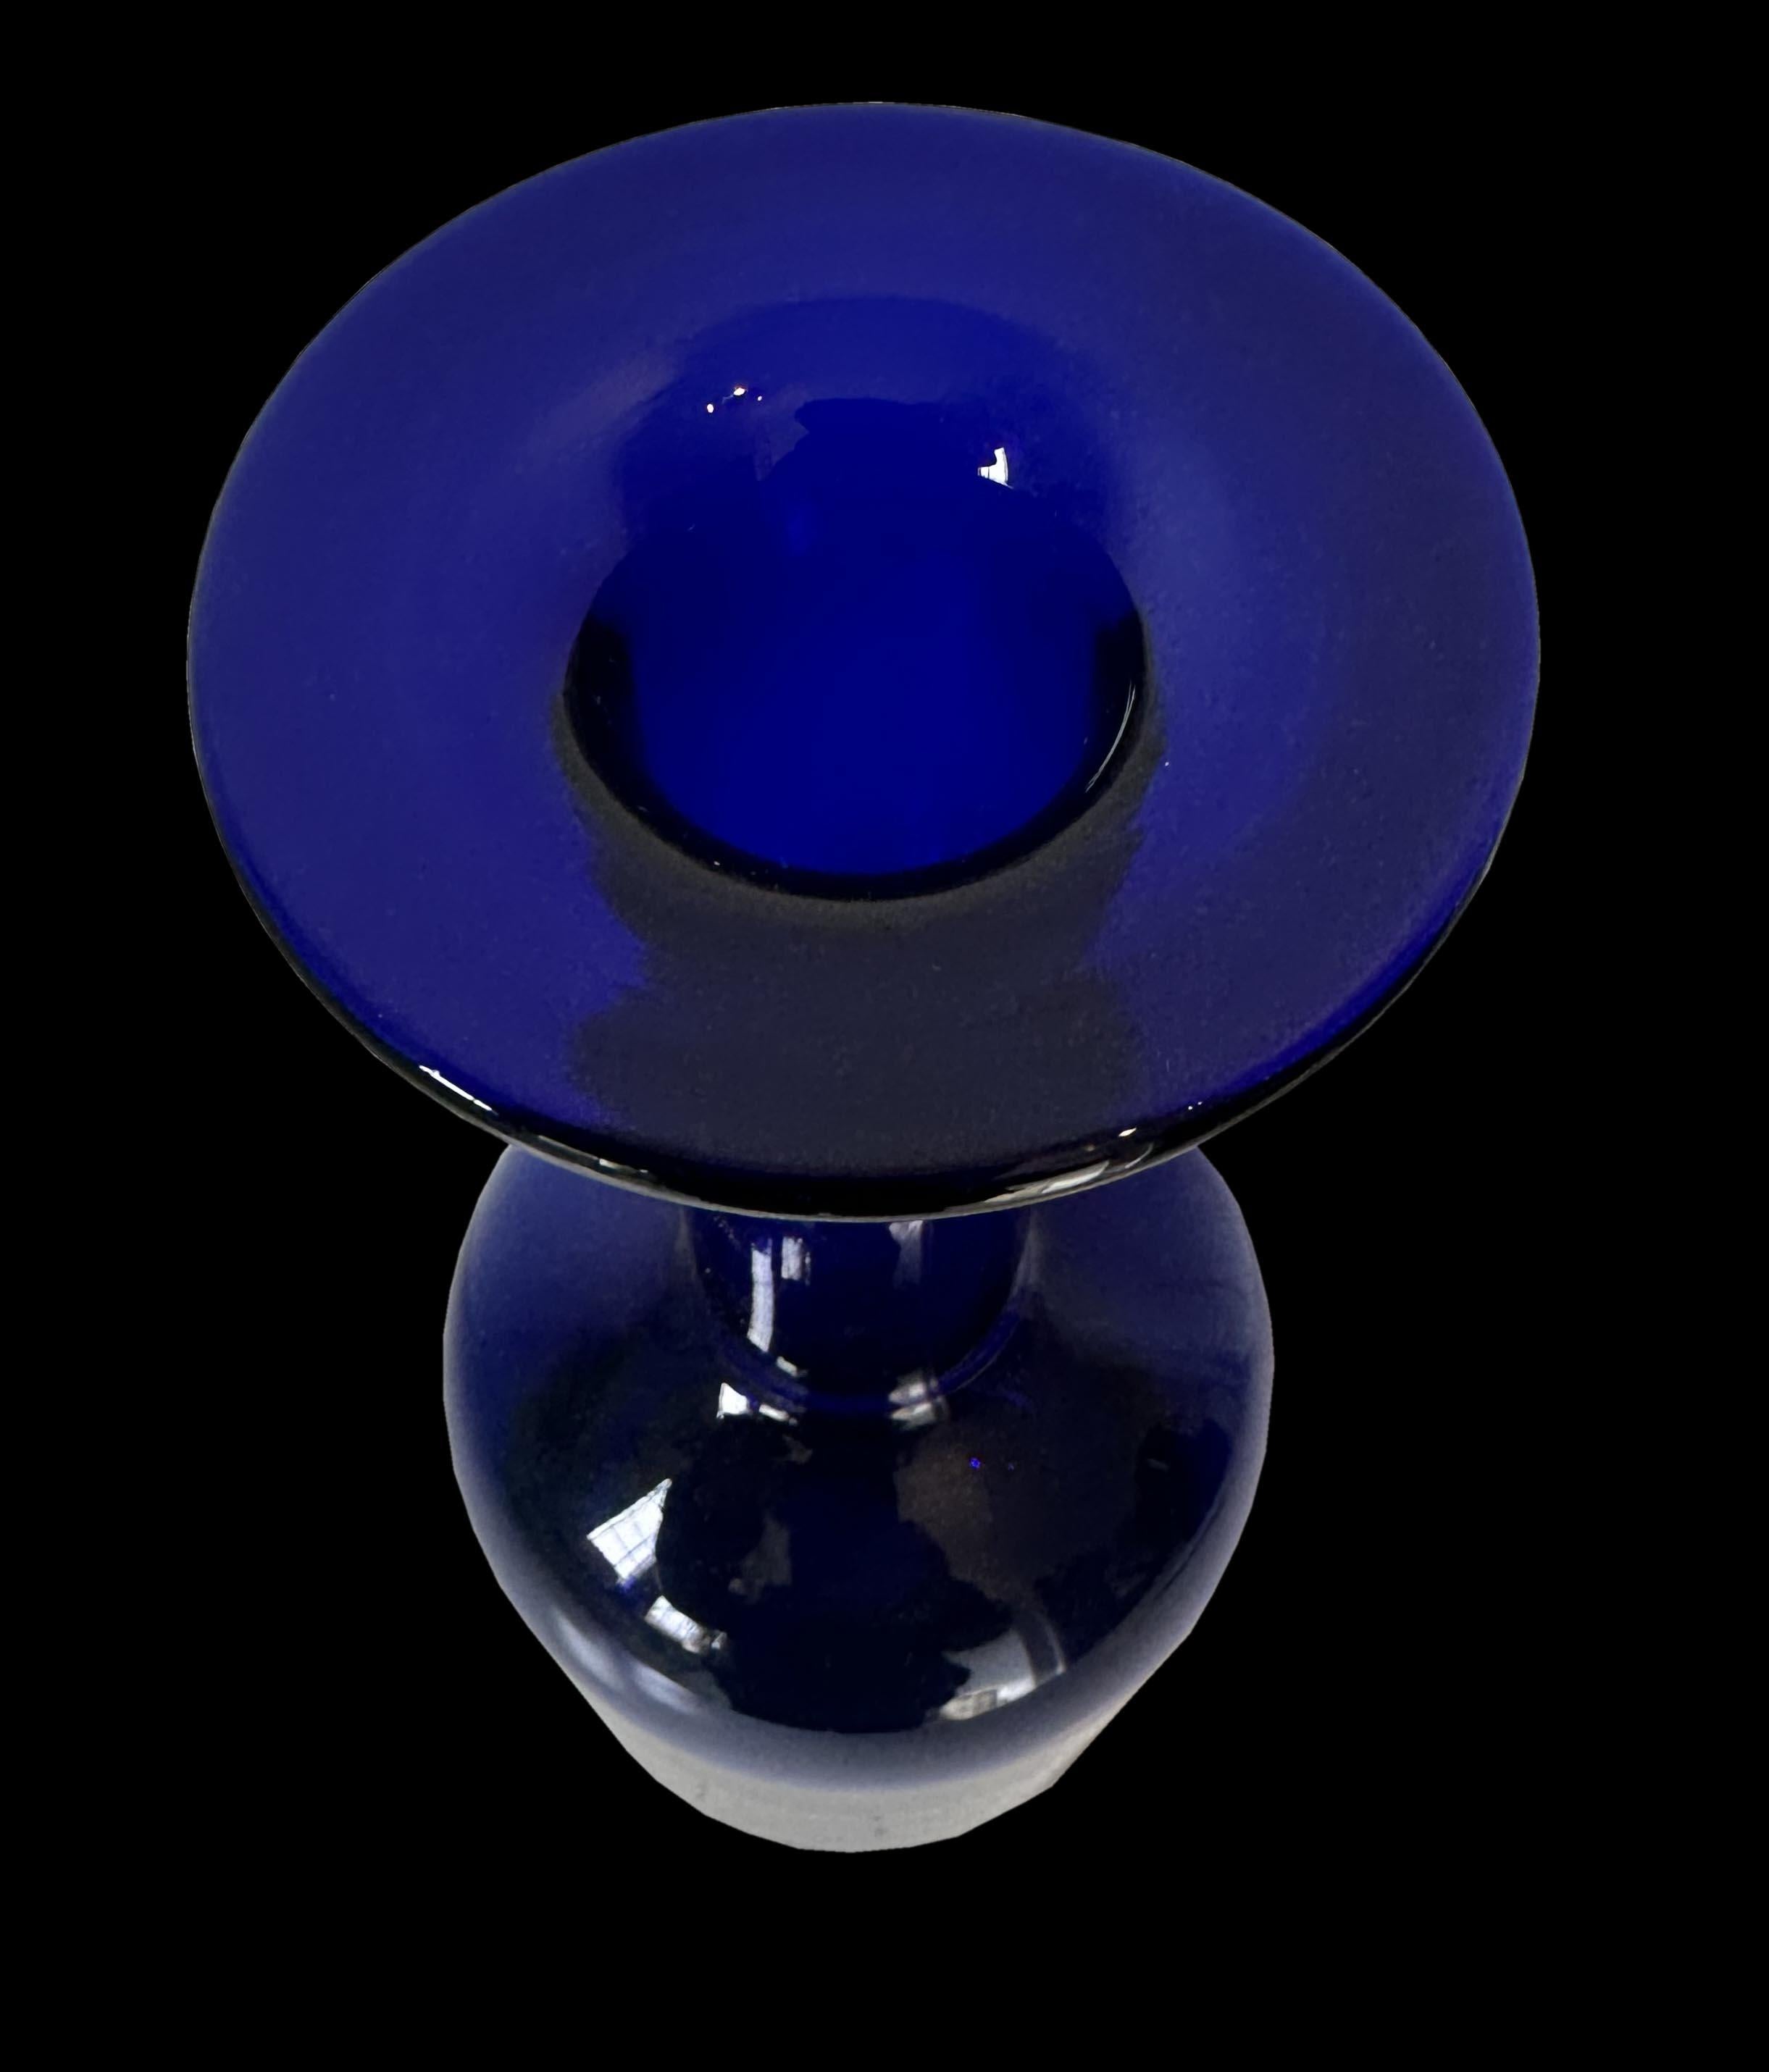 This is a very nice cobalt blue version of the super cool and stylish Gulvase by designer Otto Brauer for Holmegaard, Denmark